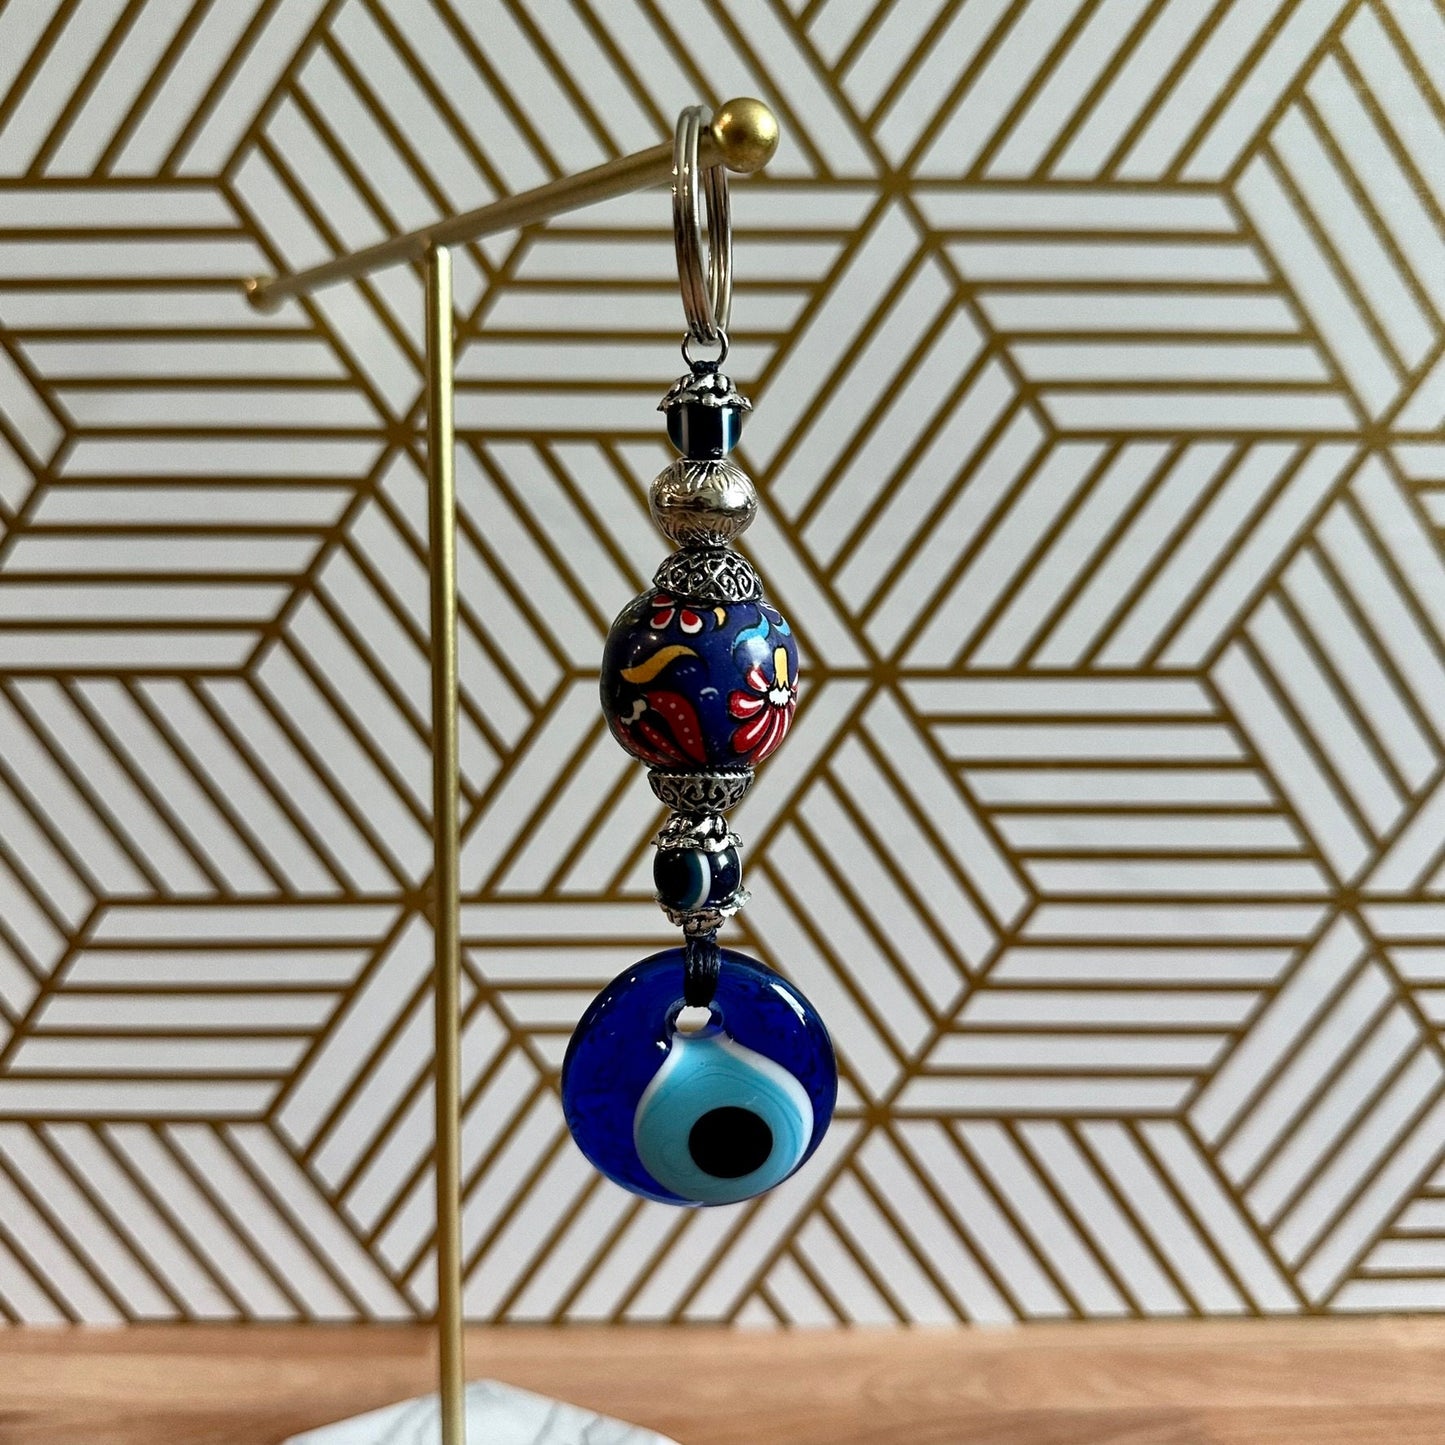 Evil Eye Nazar Boncuk Mal De Ojo Keychain with Hand Painted Ceramic Ball - Blue Floral Tulip — Fast Shipping!